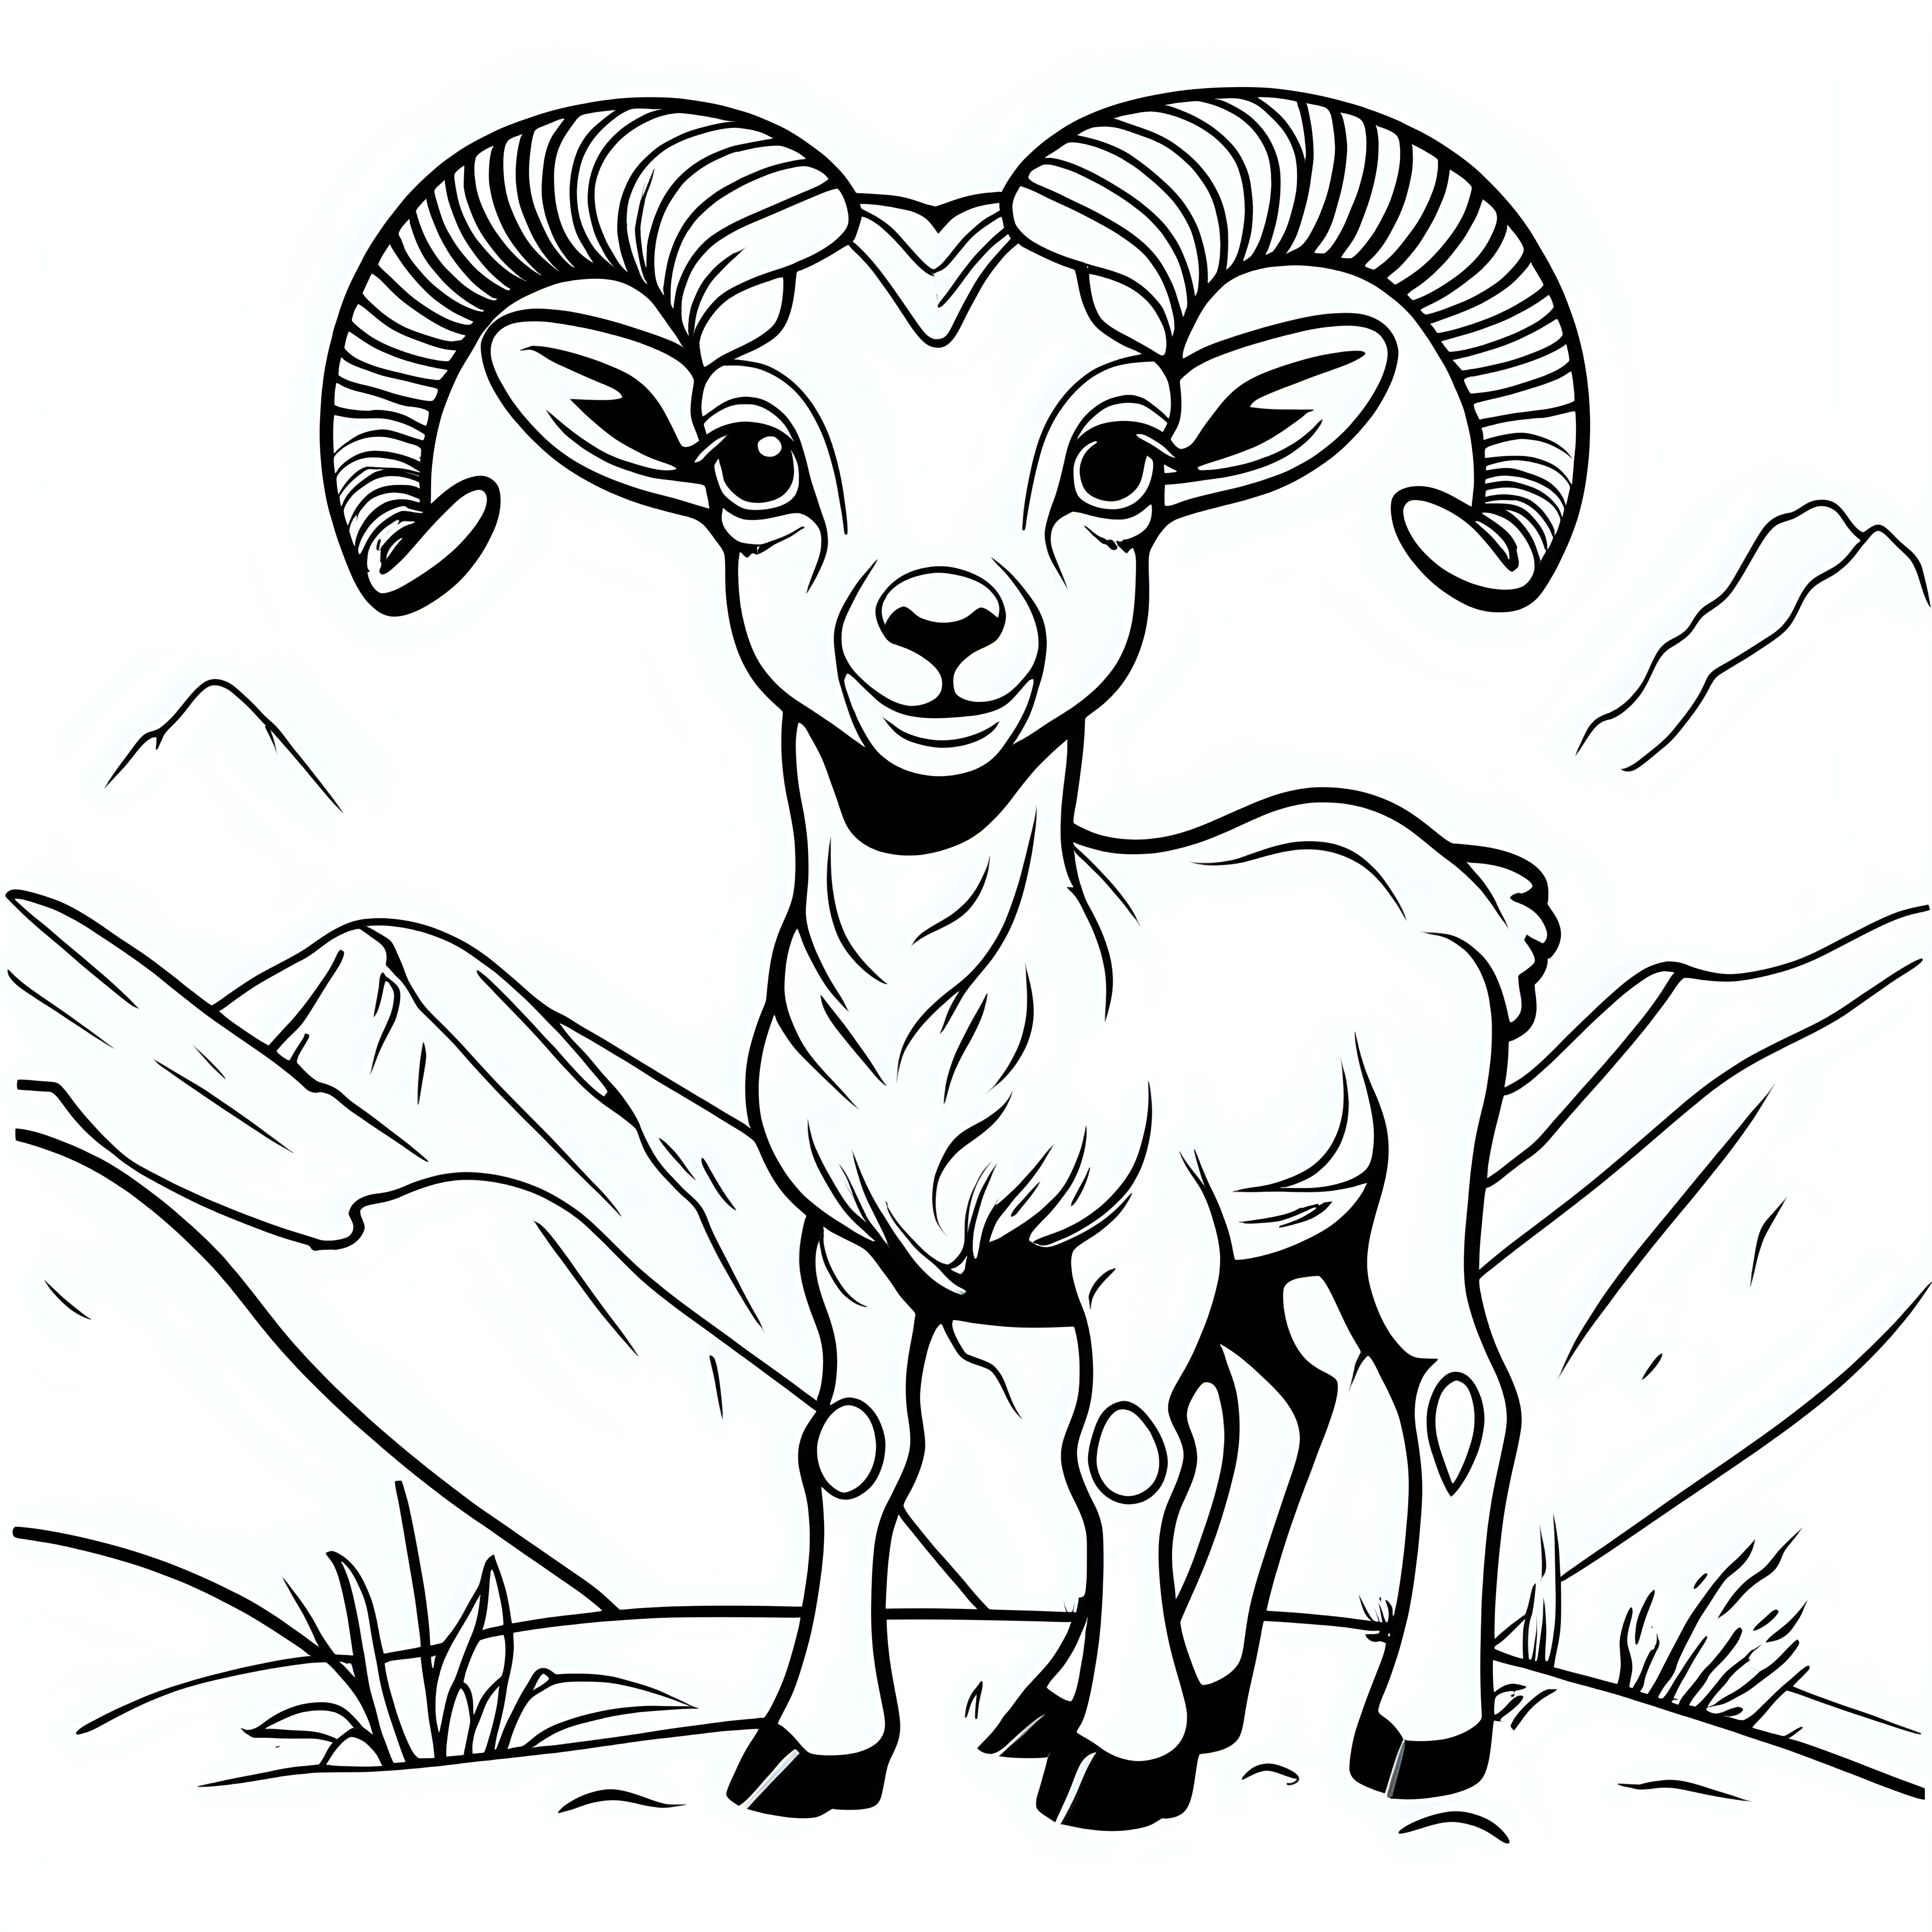 Create a cute baby Bighorn sheep, outline in black, coloring book for kids